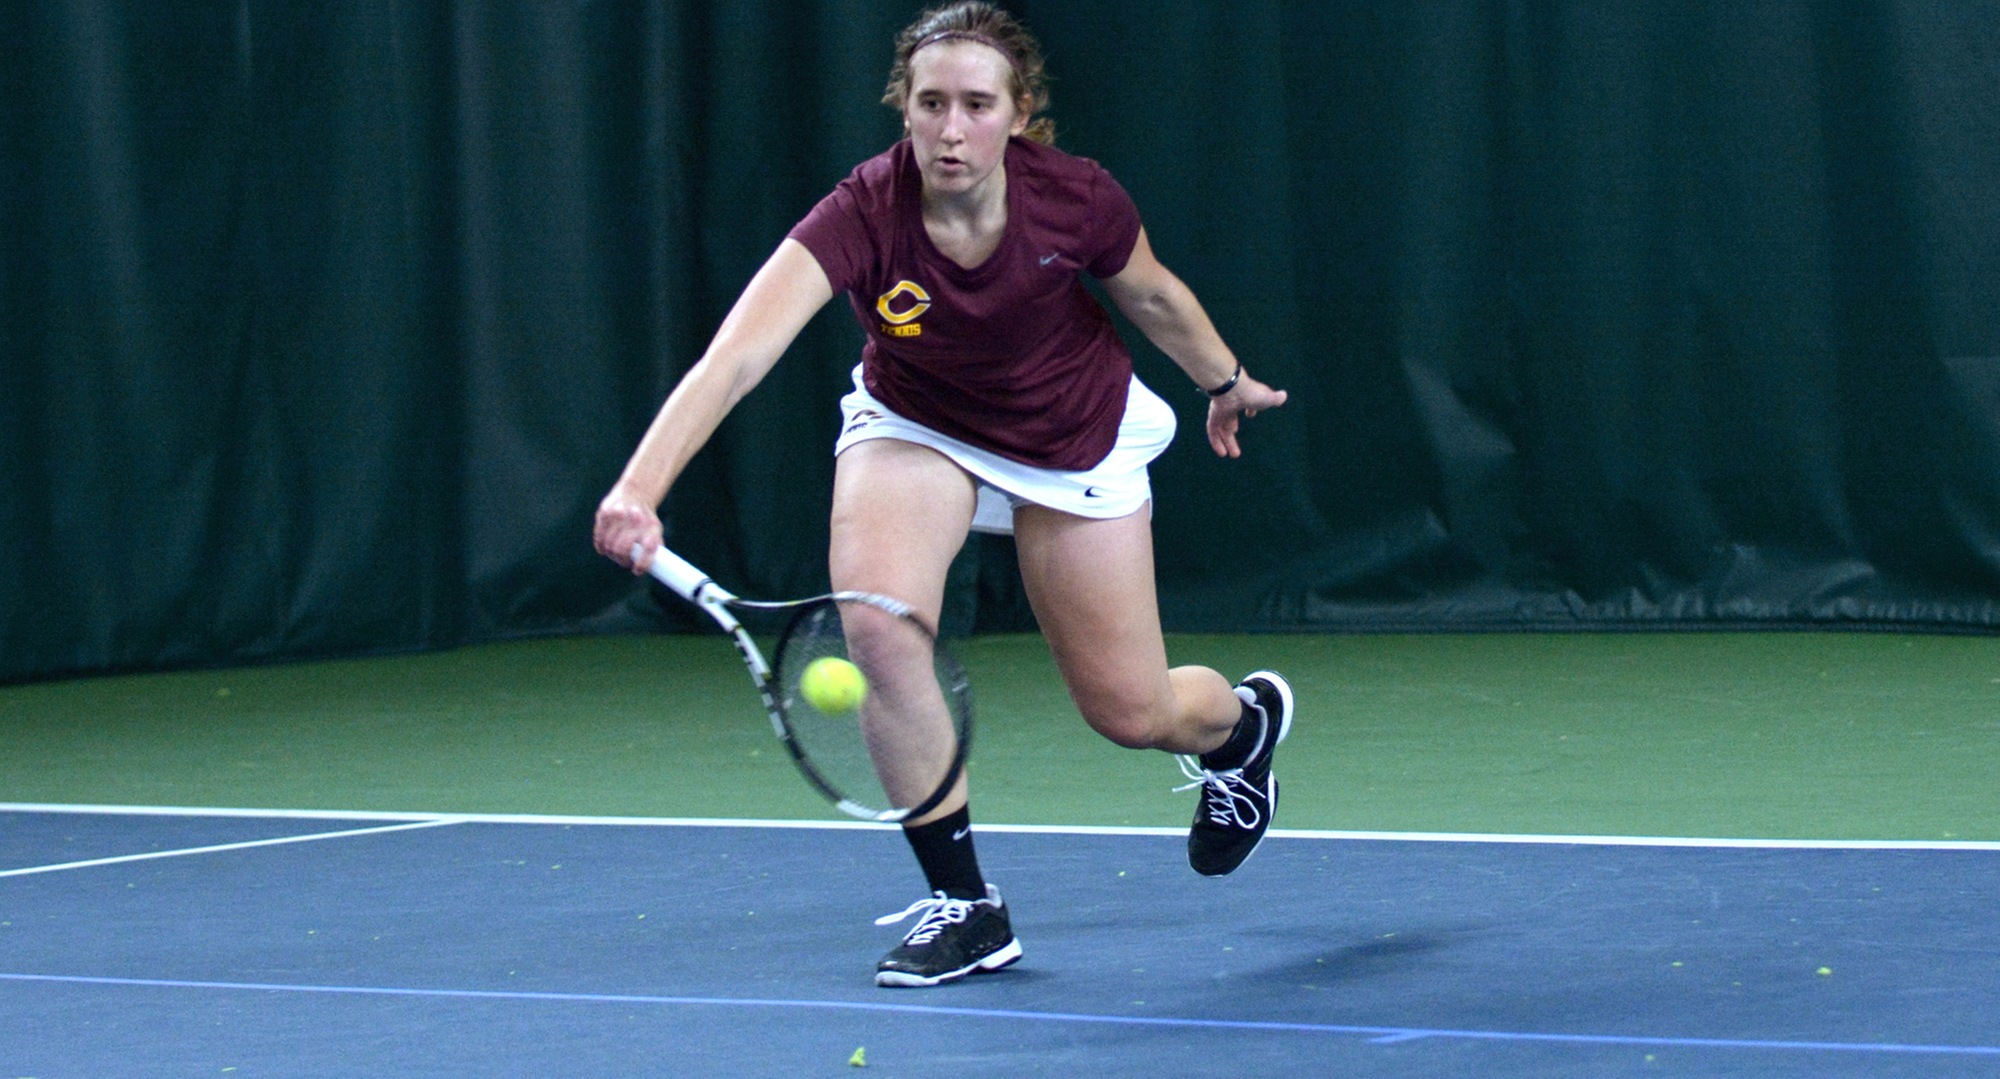 Sophomore Lisa Neumann goes down to return a shot during her 6-1, 6-0 win at No.2 singles in the Cobbers' season opener.